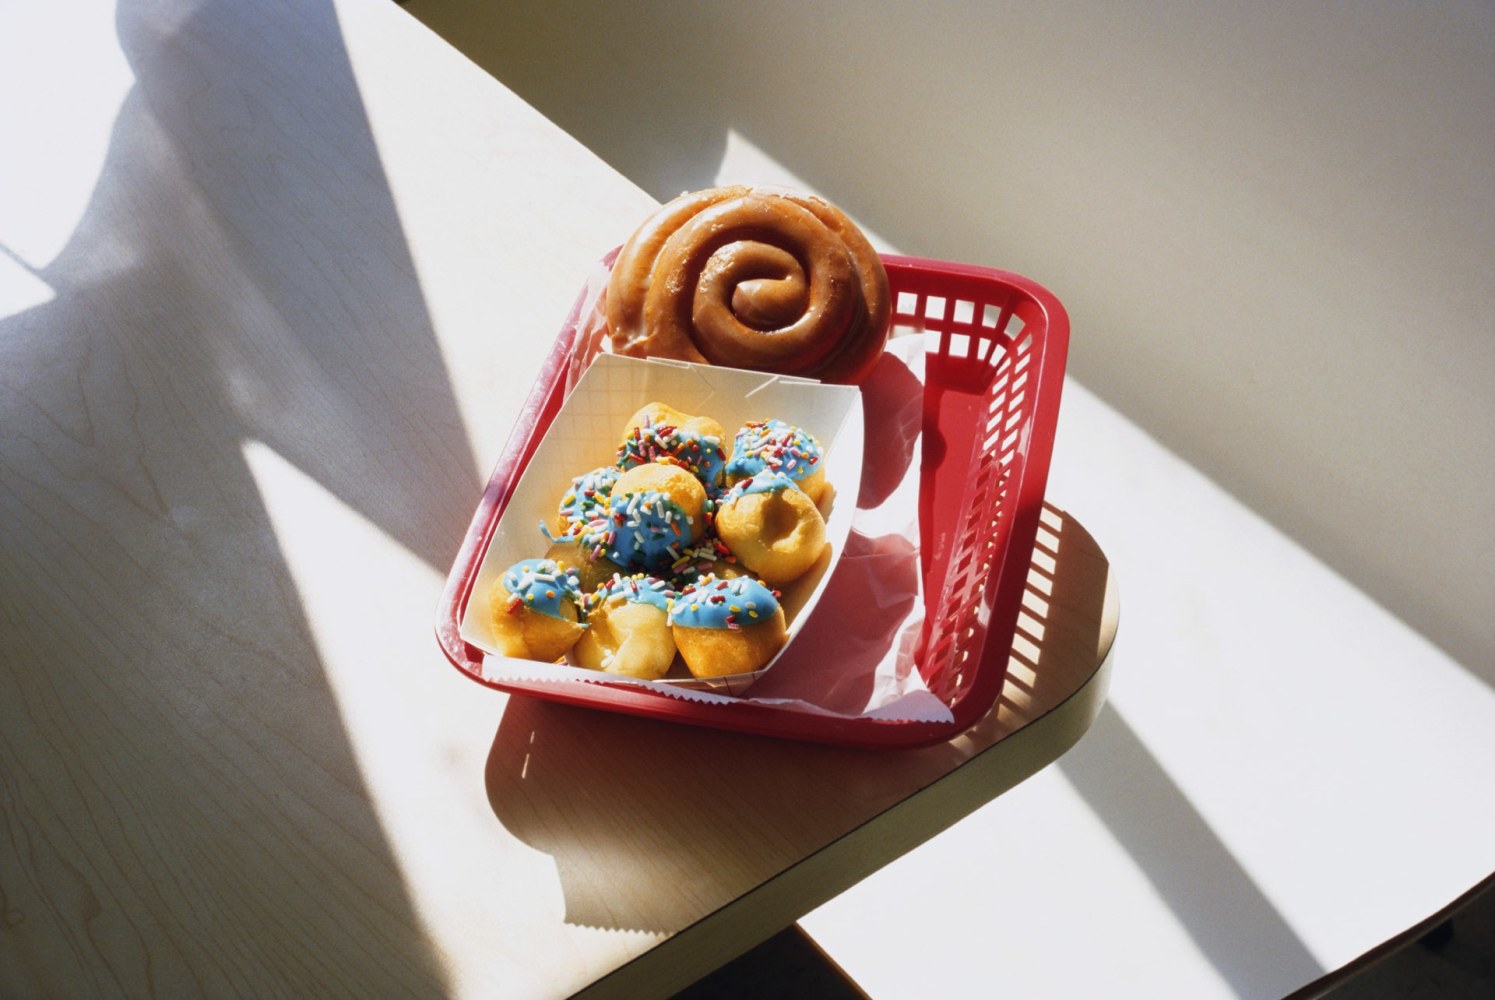 Untitled (Cinnamon Roll Basket), 2022

archival pigment print, ed. of 3 + 2AP

24&amp;nbsp;&amp;times; 36 in. / 61&amp;nbsp;&amp;times; 91.4 cm